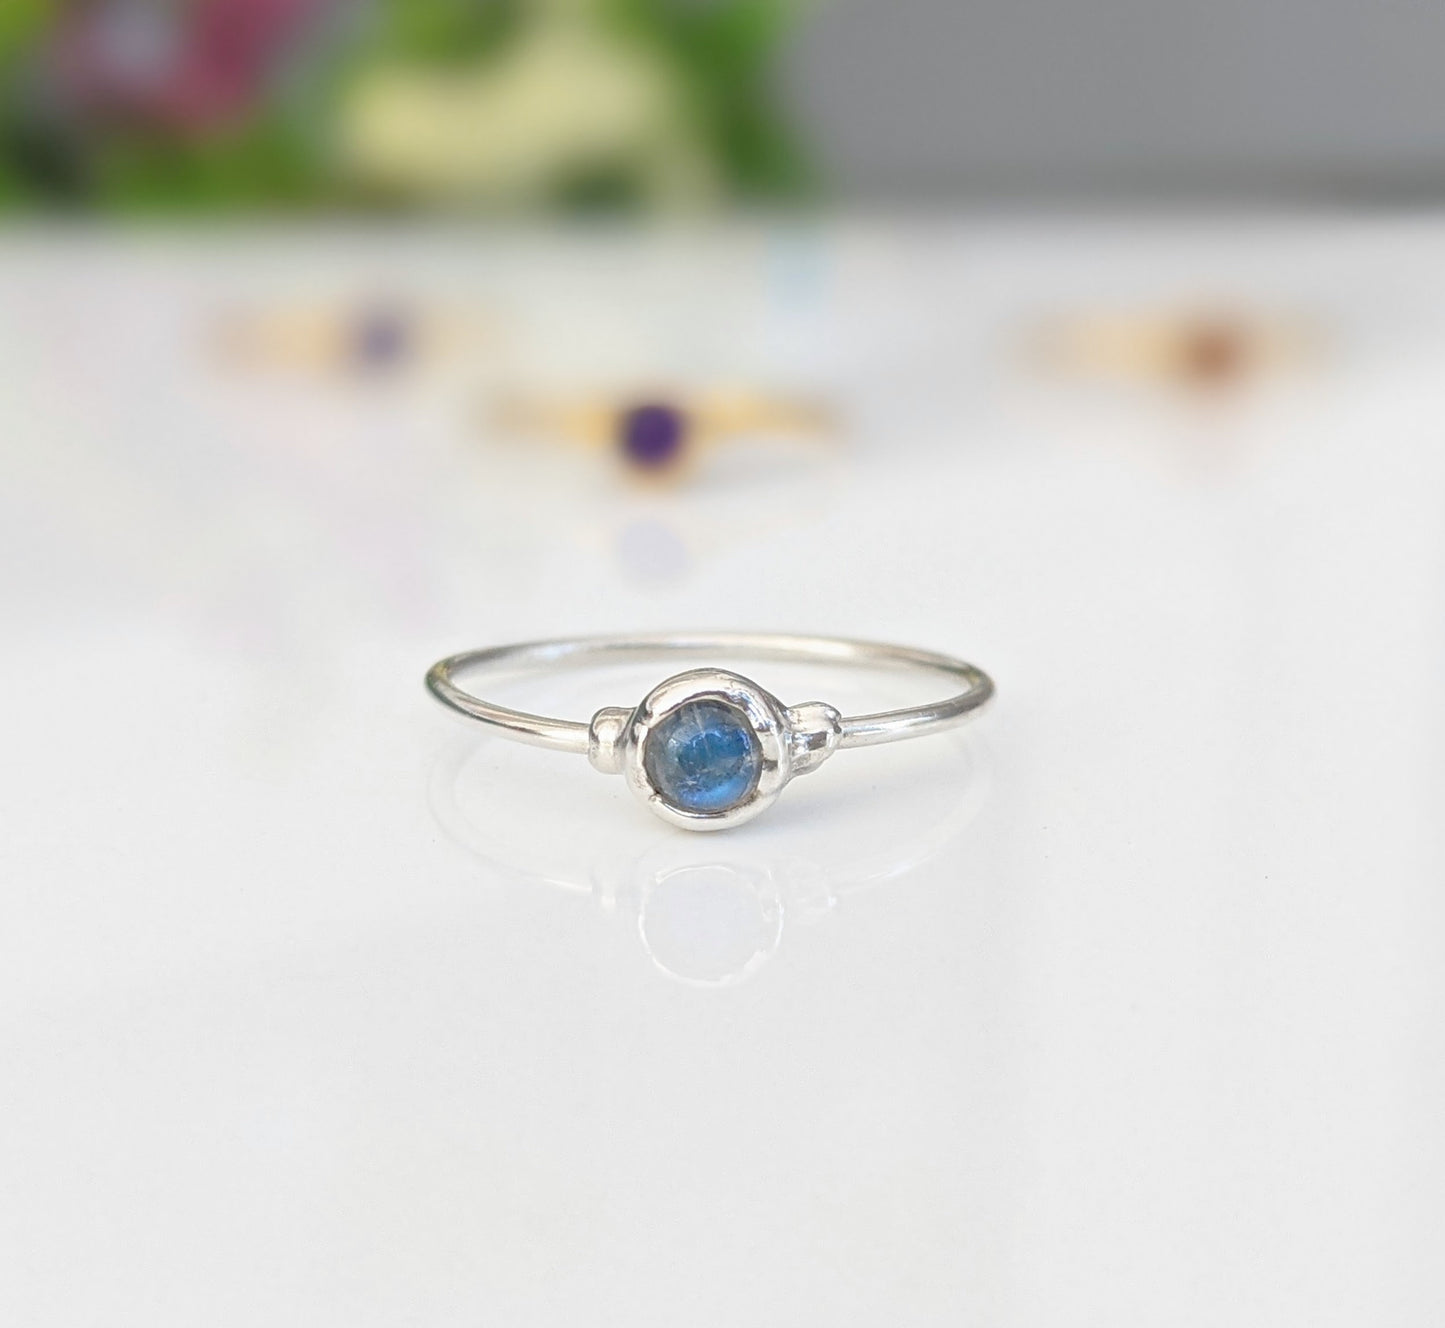 Dainty Moonstone Stacking rings in unique Sterling Silver setting